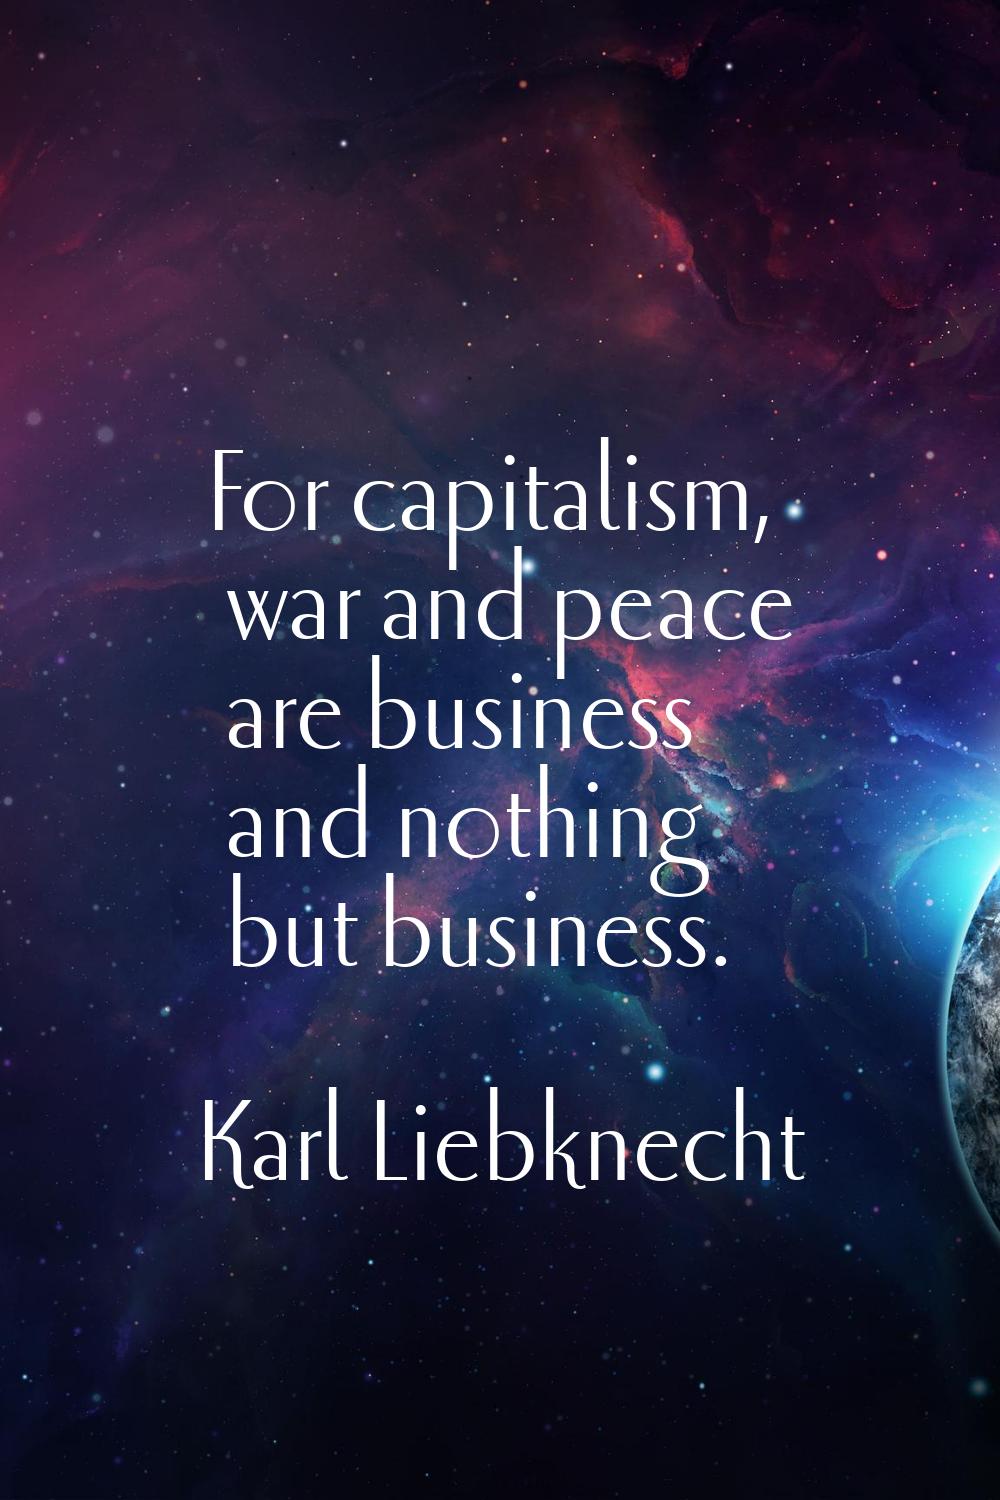 For capitalism, war and peace are business and nothing but business.